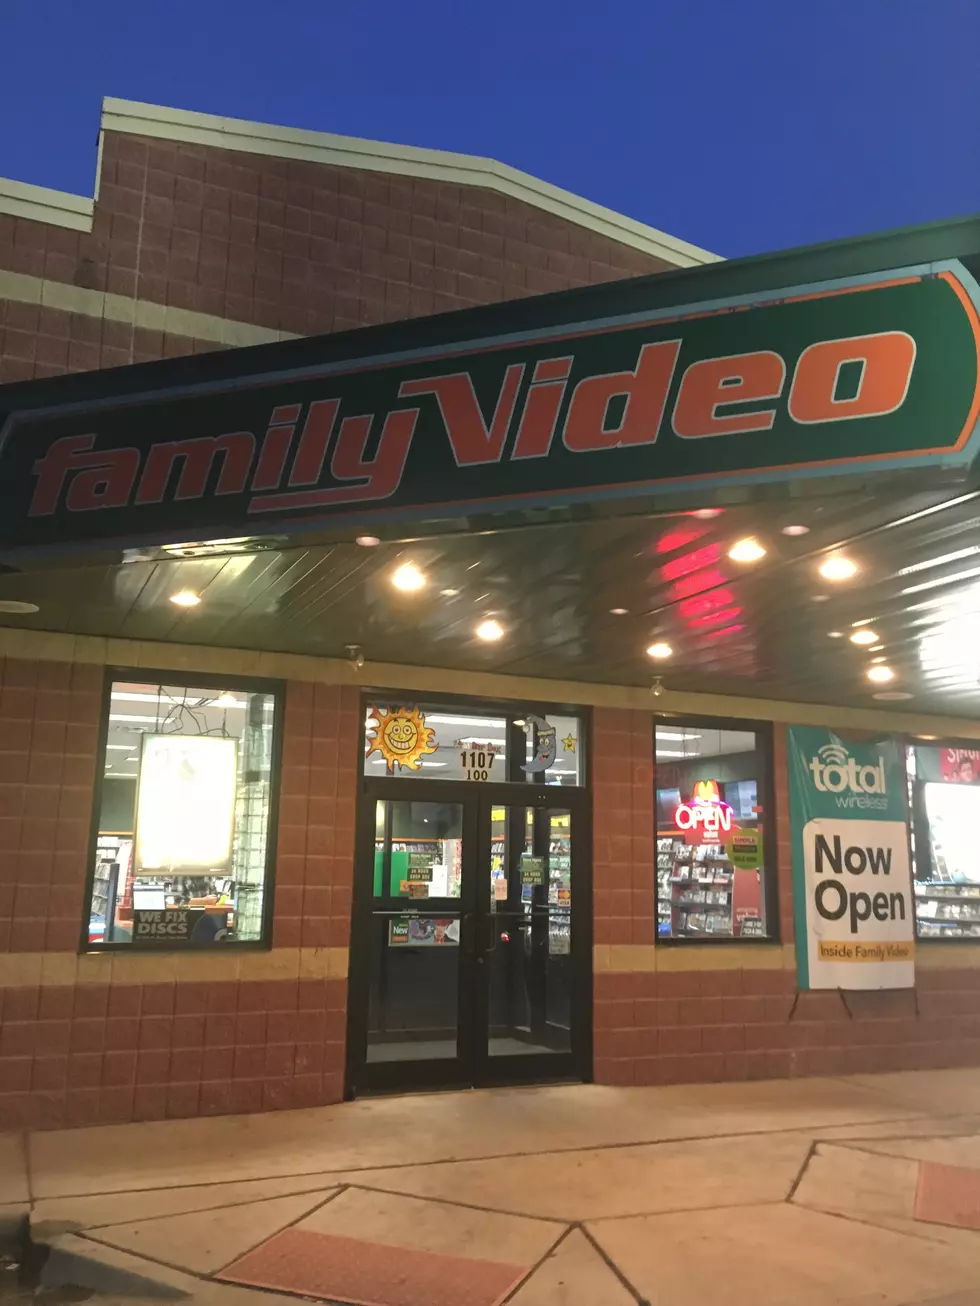 I Found A Video Rental Store This Weekend! Mind-Blown!